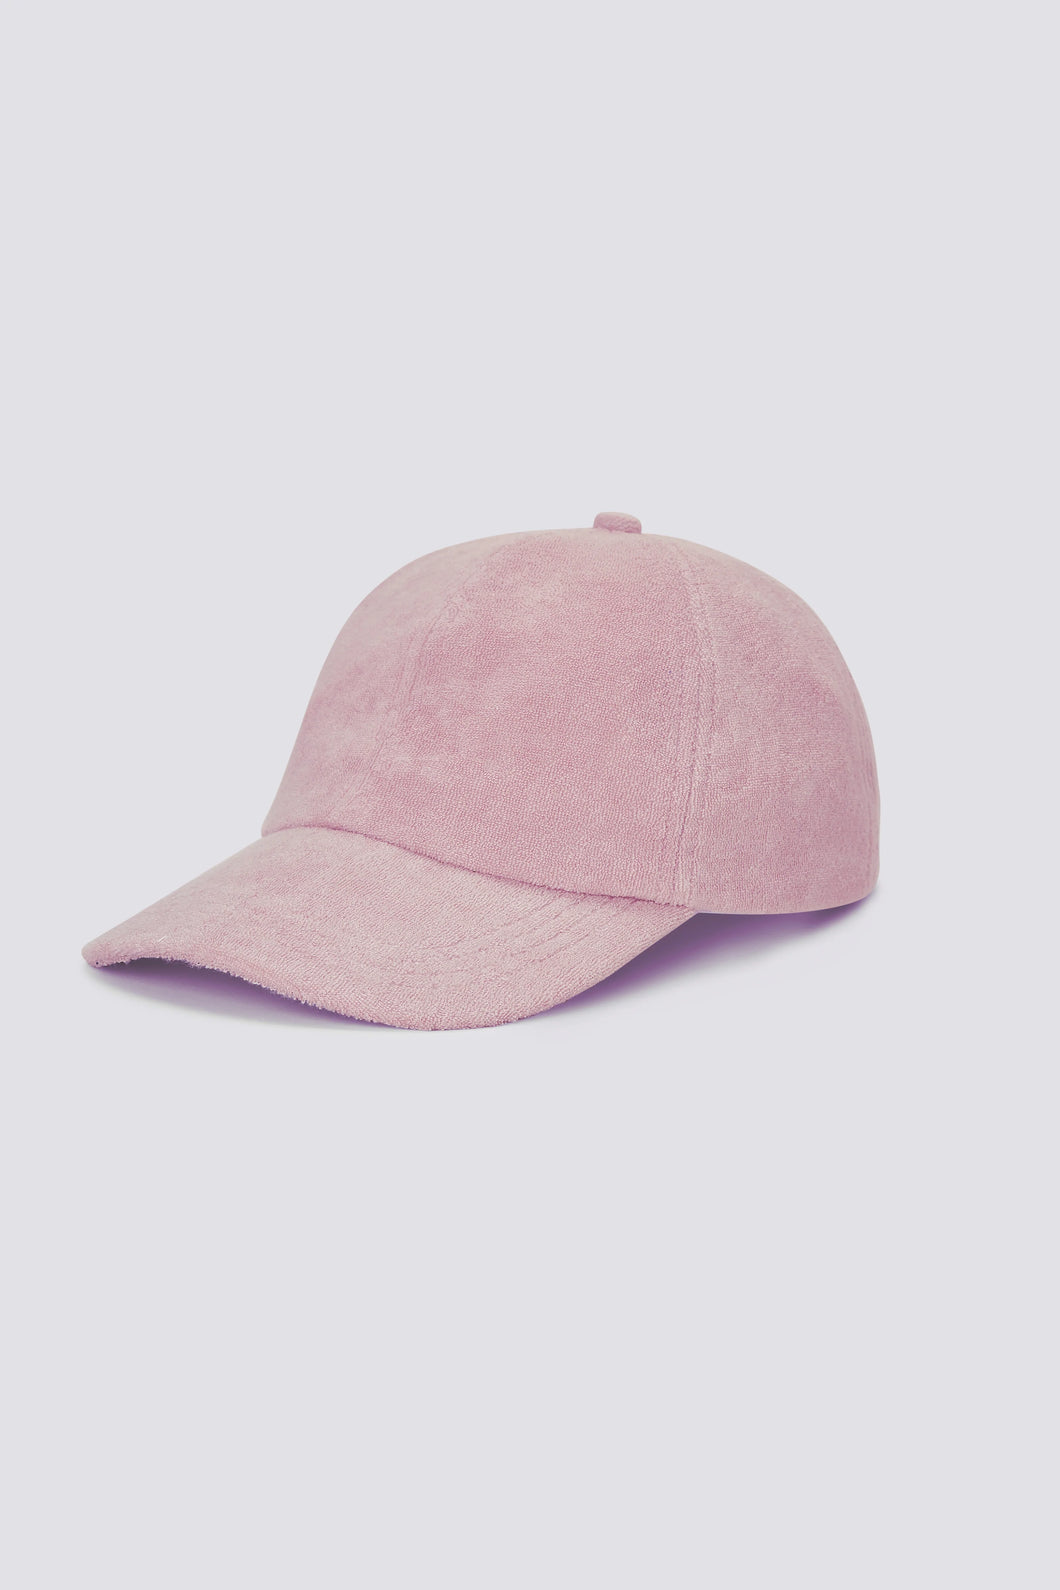 Terry Cloth Hat - Palm Springs Pink